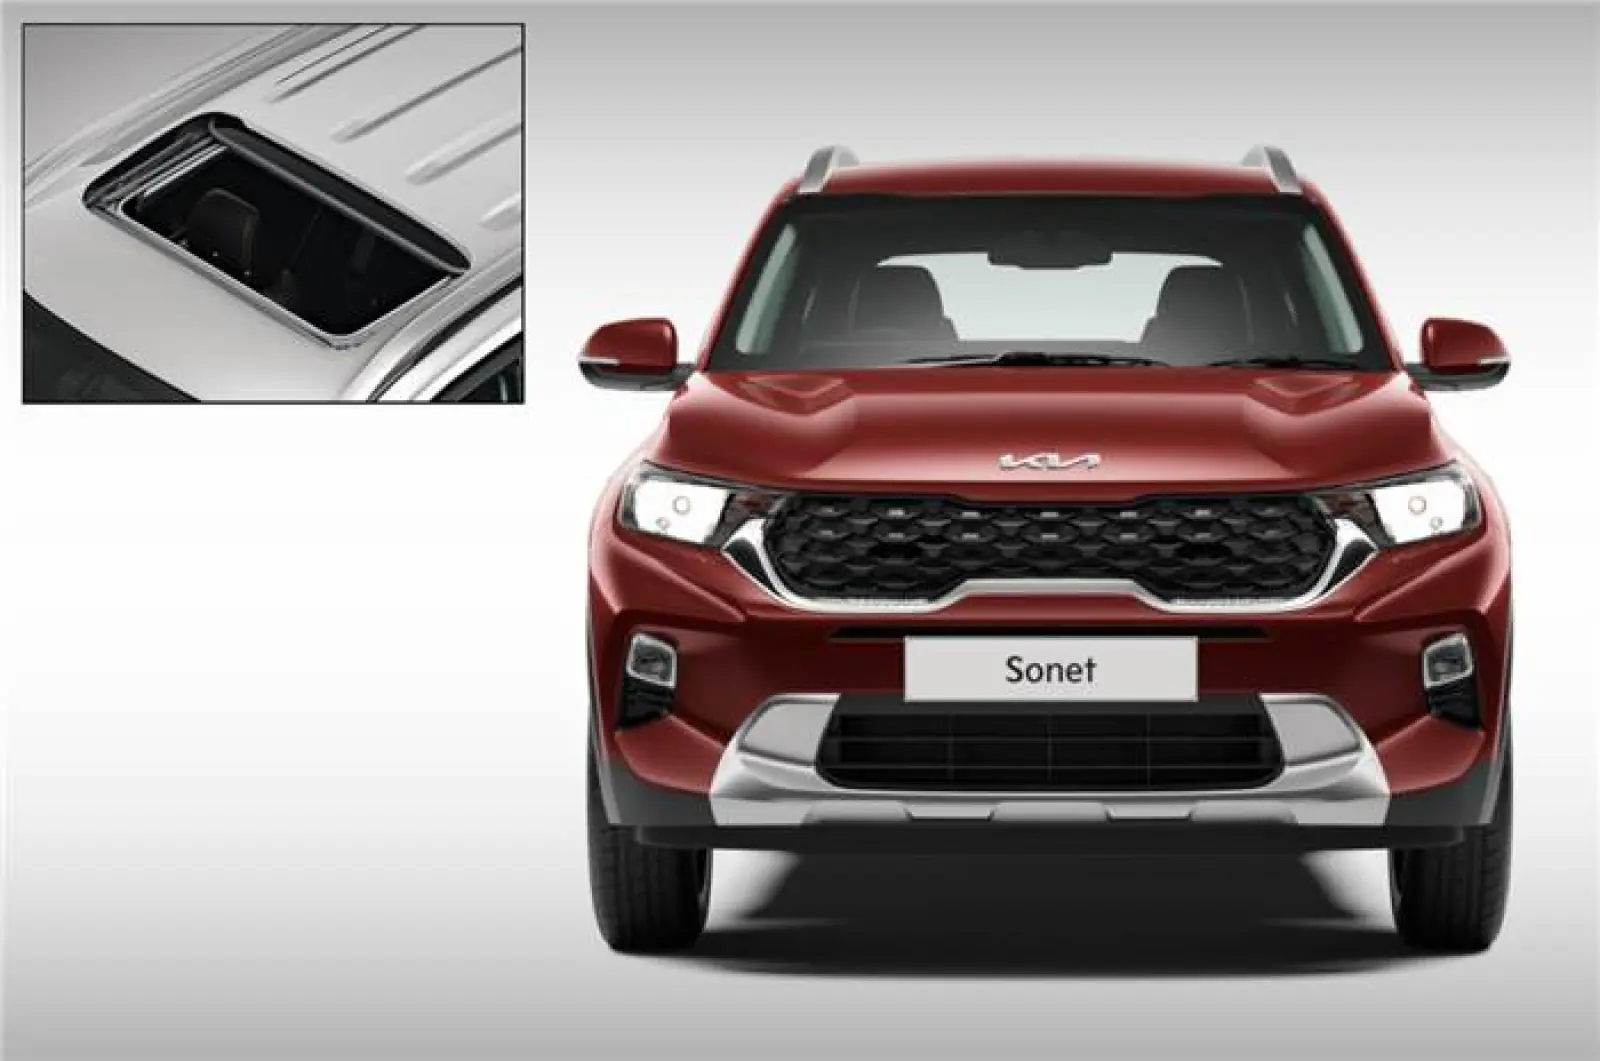 Kia Sonet versions at lower prices may be introduced with a sunroof